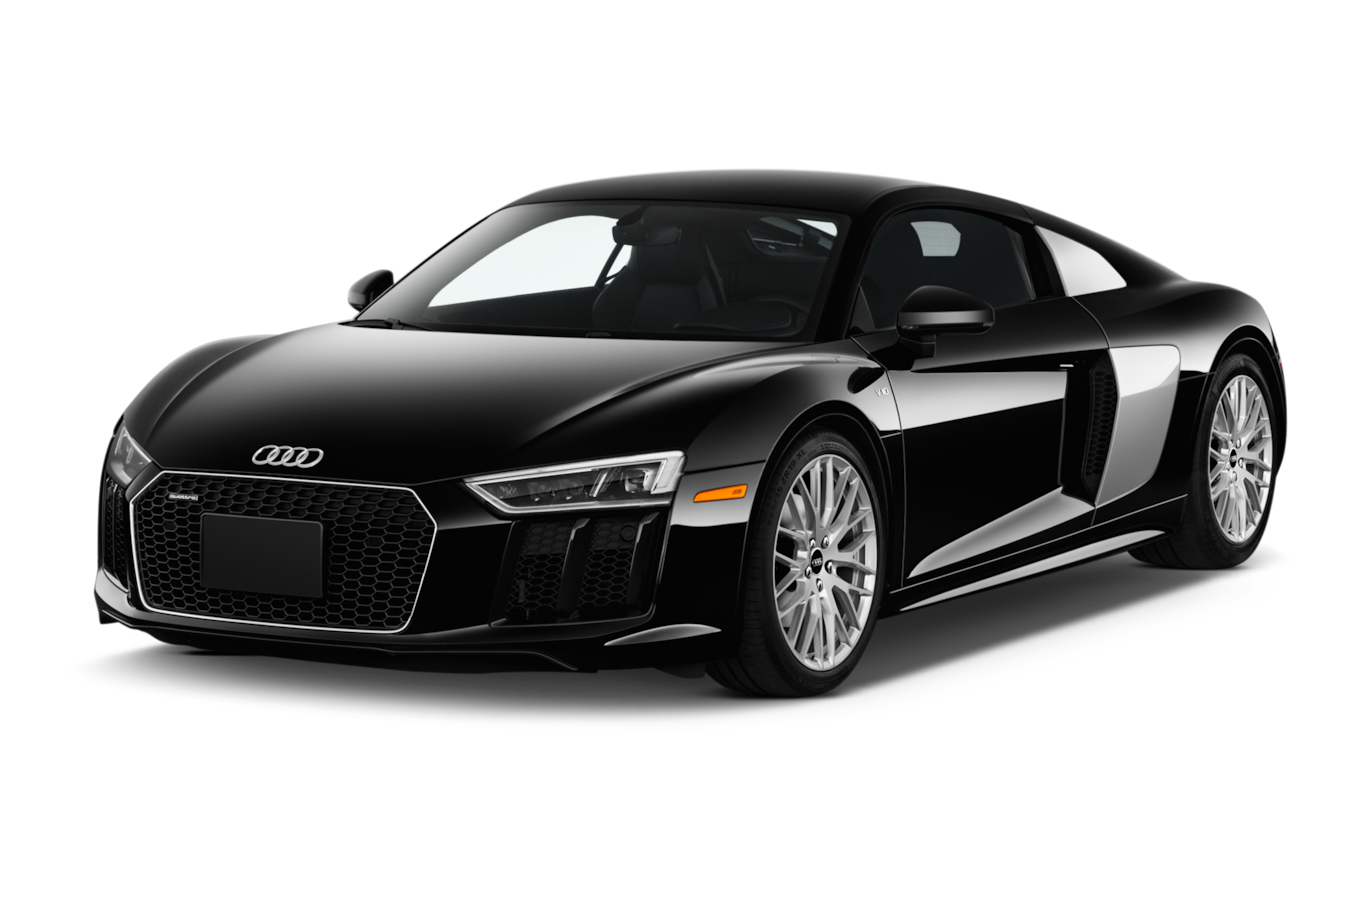 2018 Audi R8 Reviews   Research R8 Prices Specs   Motortrend